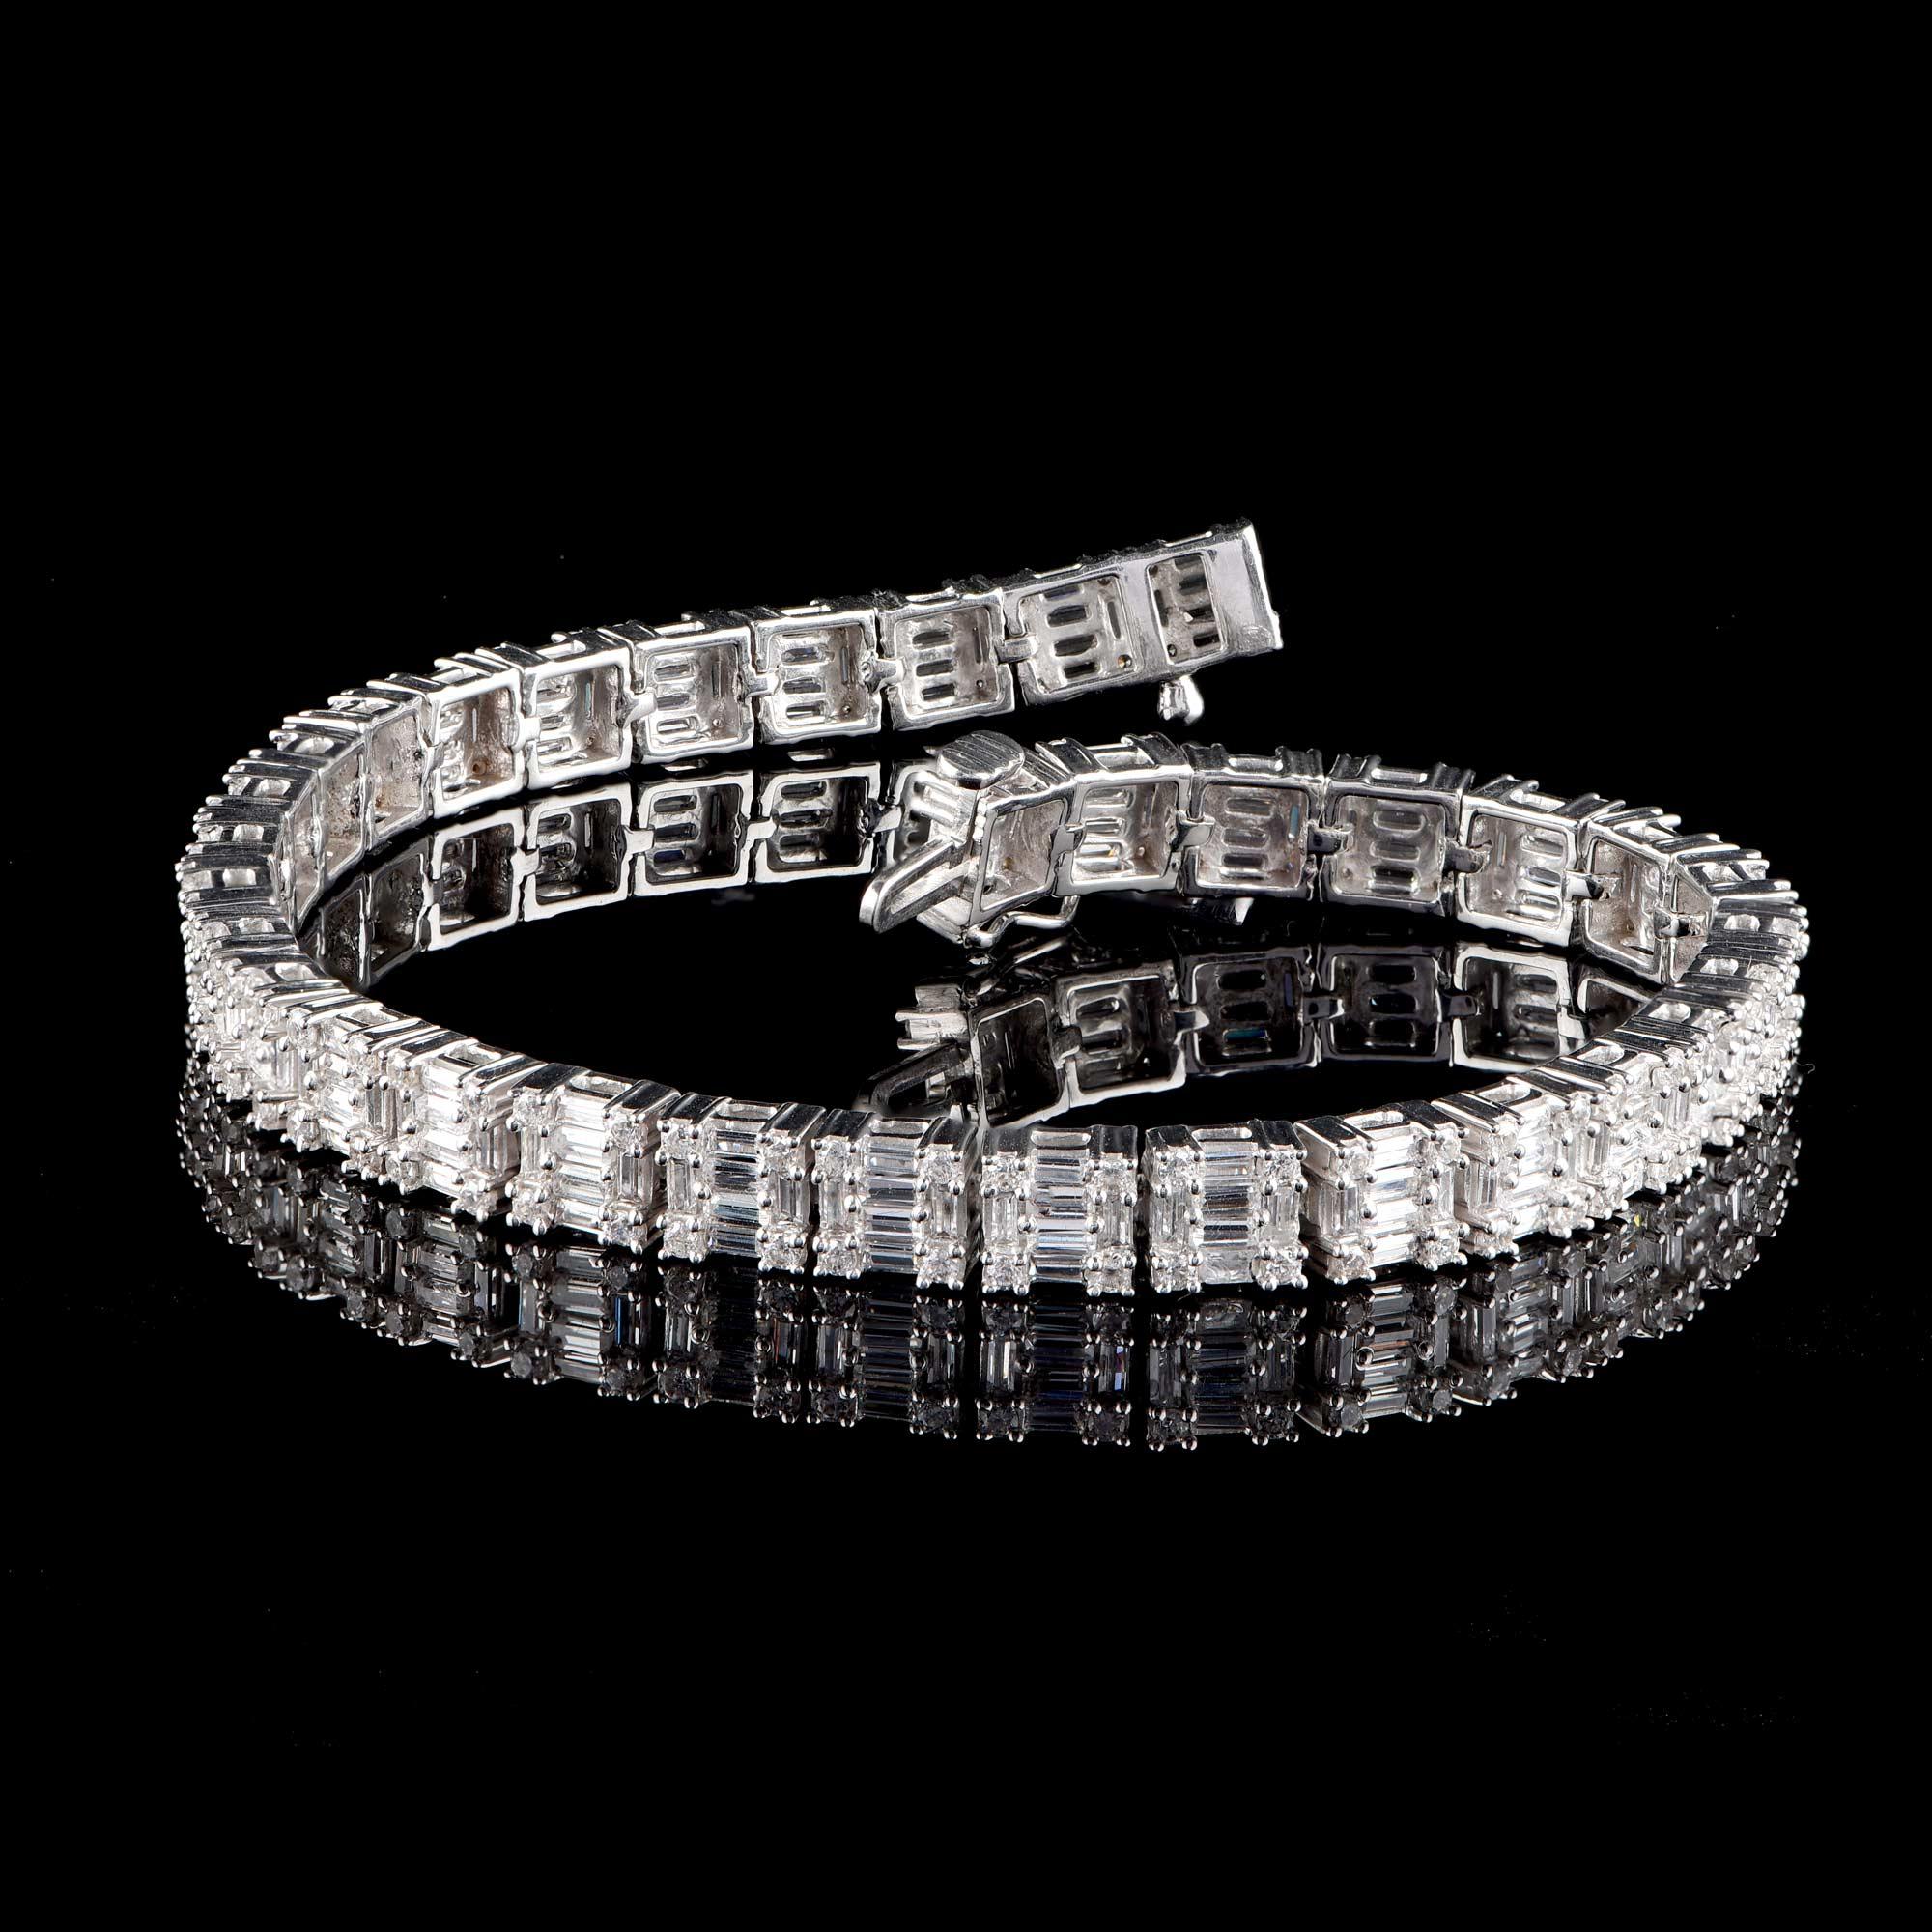 Exquisite design, this diamond bracelet is studded with 136 brilliant cut and 204 baguette-cut diamonds in prong setting and crafted in 18-karat white gold. The diamonds are graded H-I Color, I2 Clarity. 

This piece is made to order, please allow